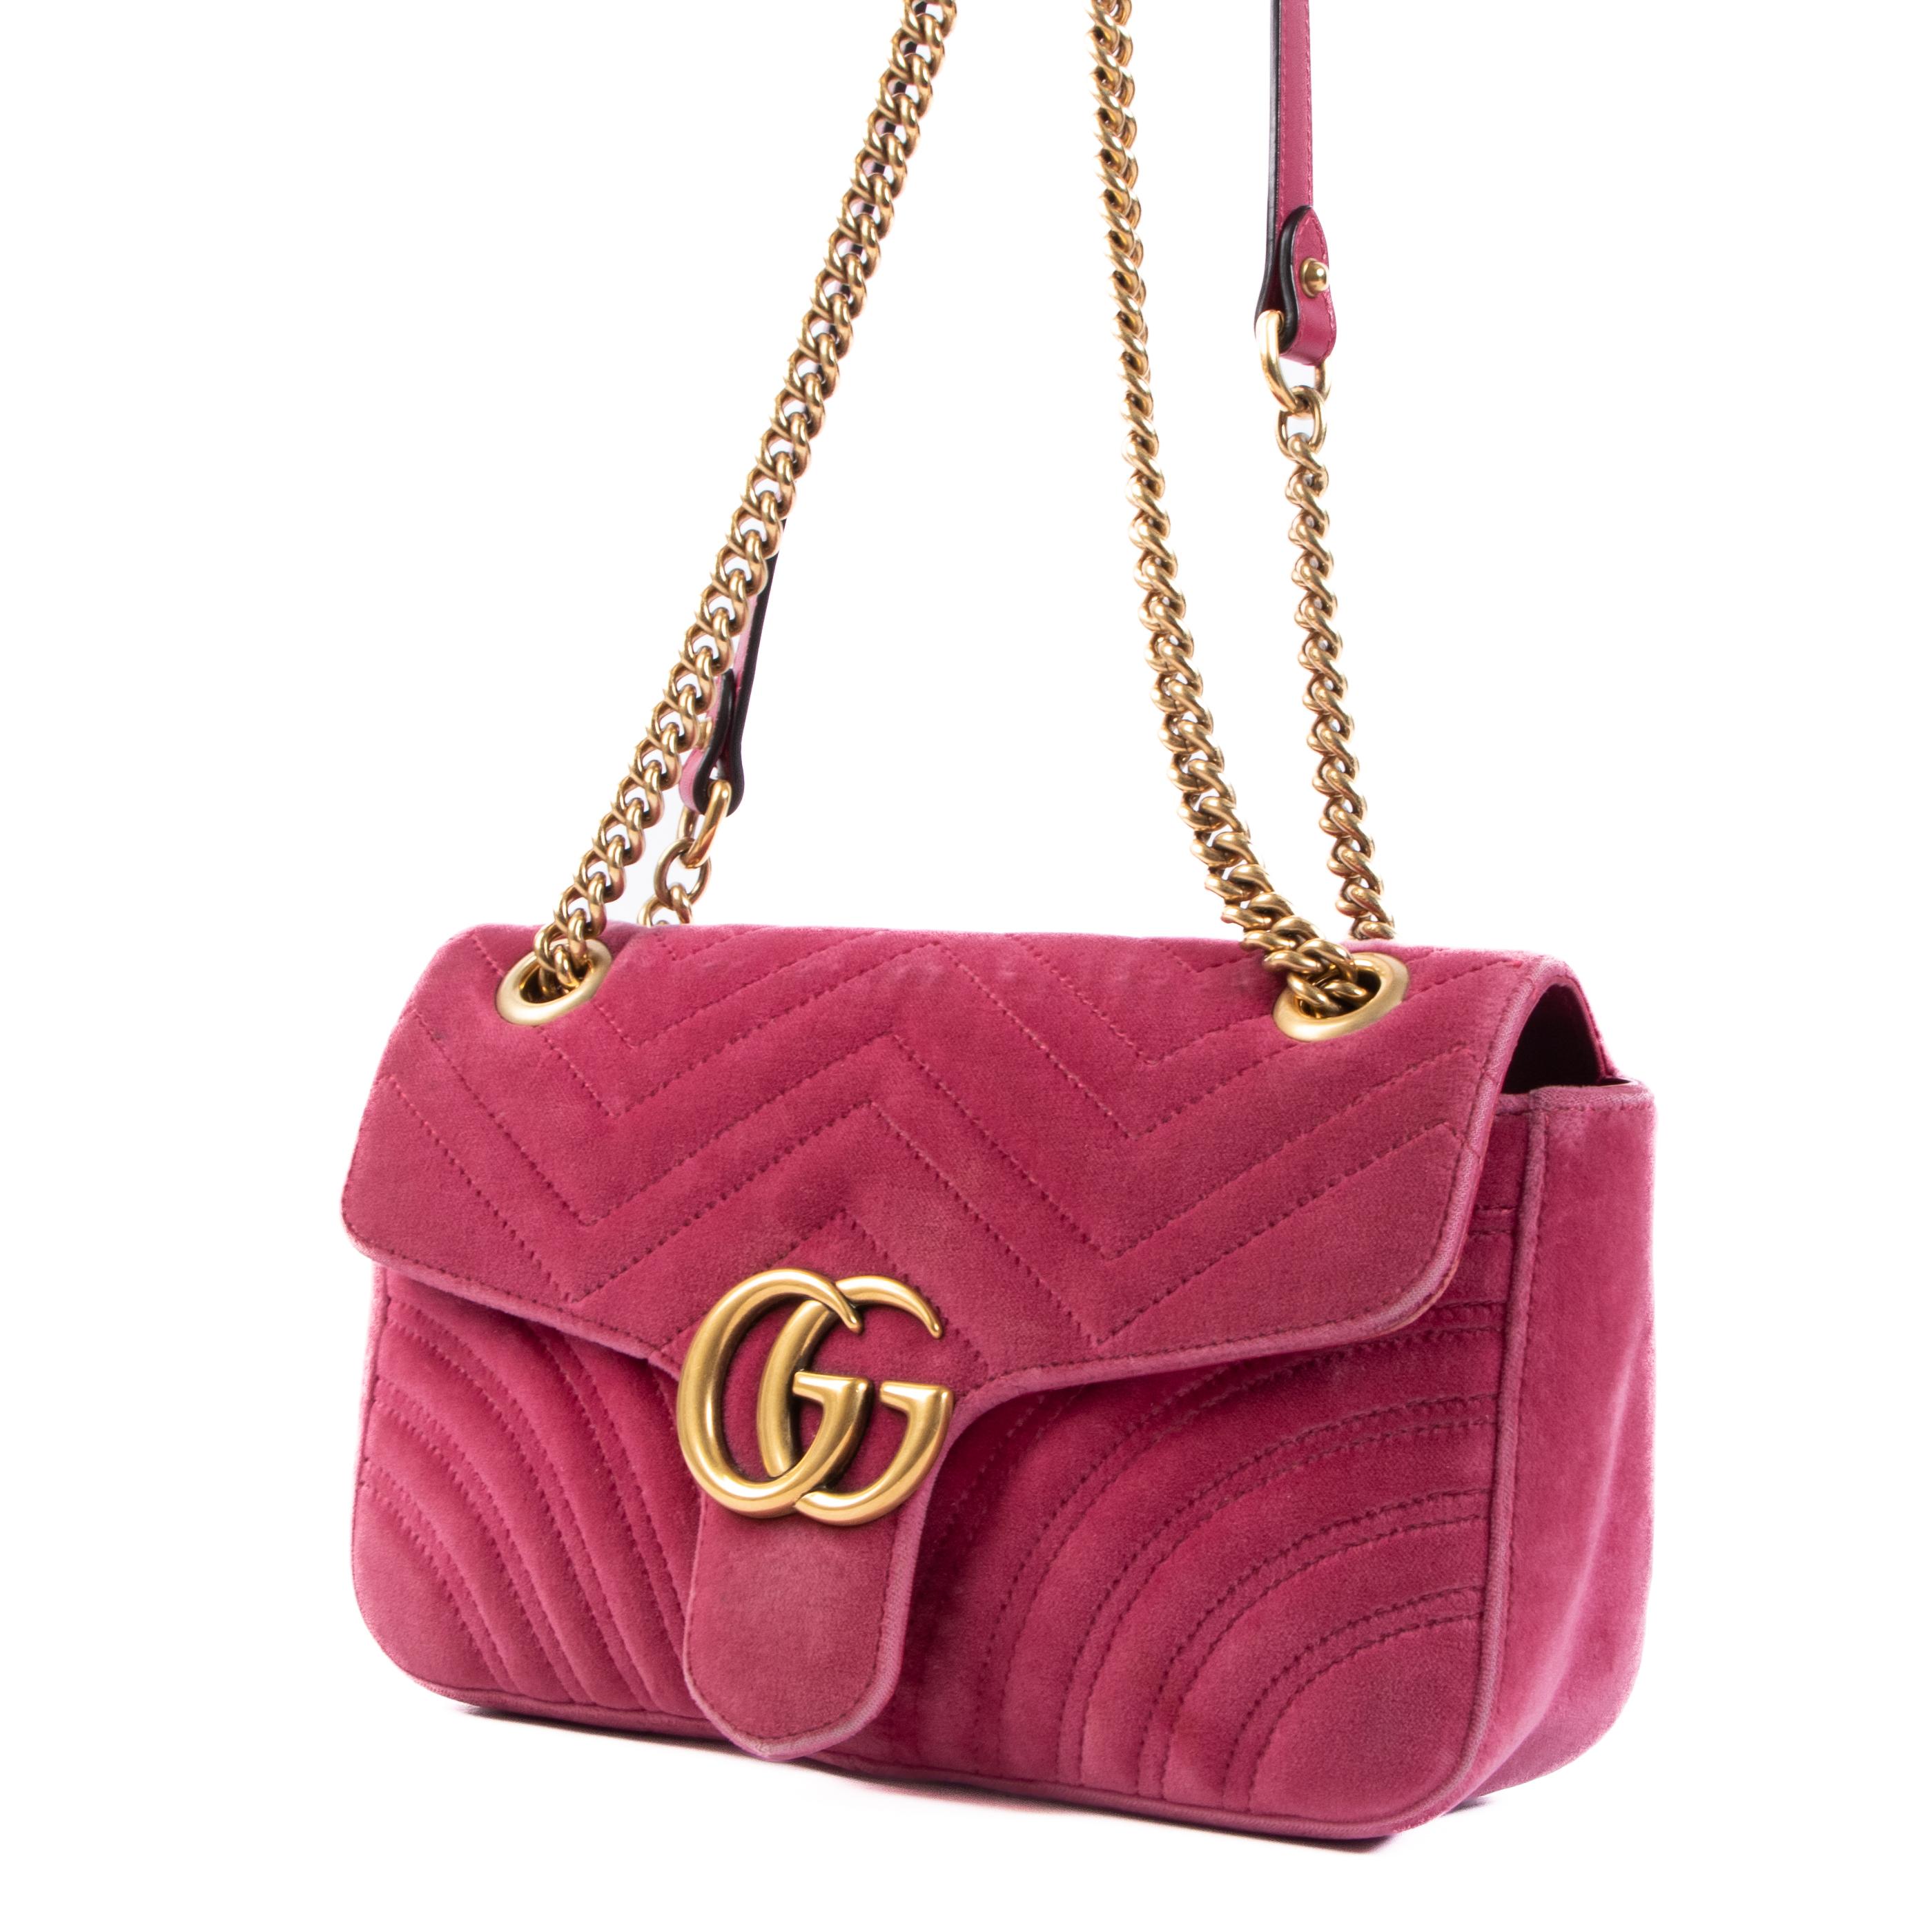 The Gucci Pink Velvet GG Small Marmont Crossbody bag is a stylish and elegant designer handbag that is crafted from luxurious pink velvet material. It is a part of Gucci's Marmont collection, which is known for its iconic double GG logo design.

The